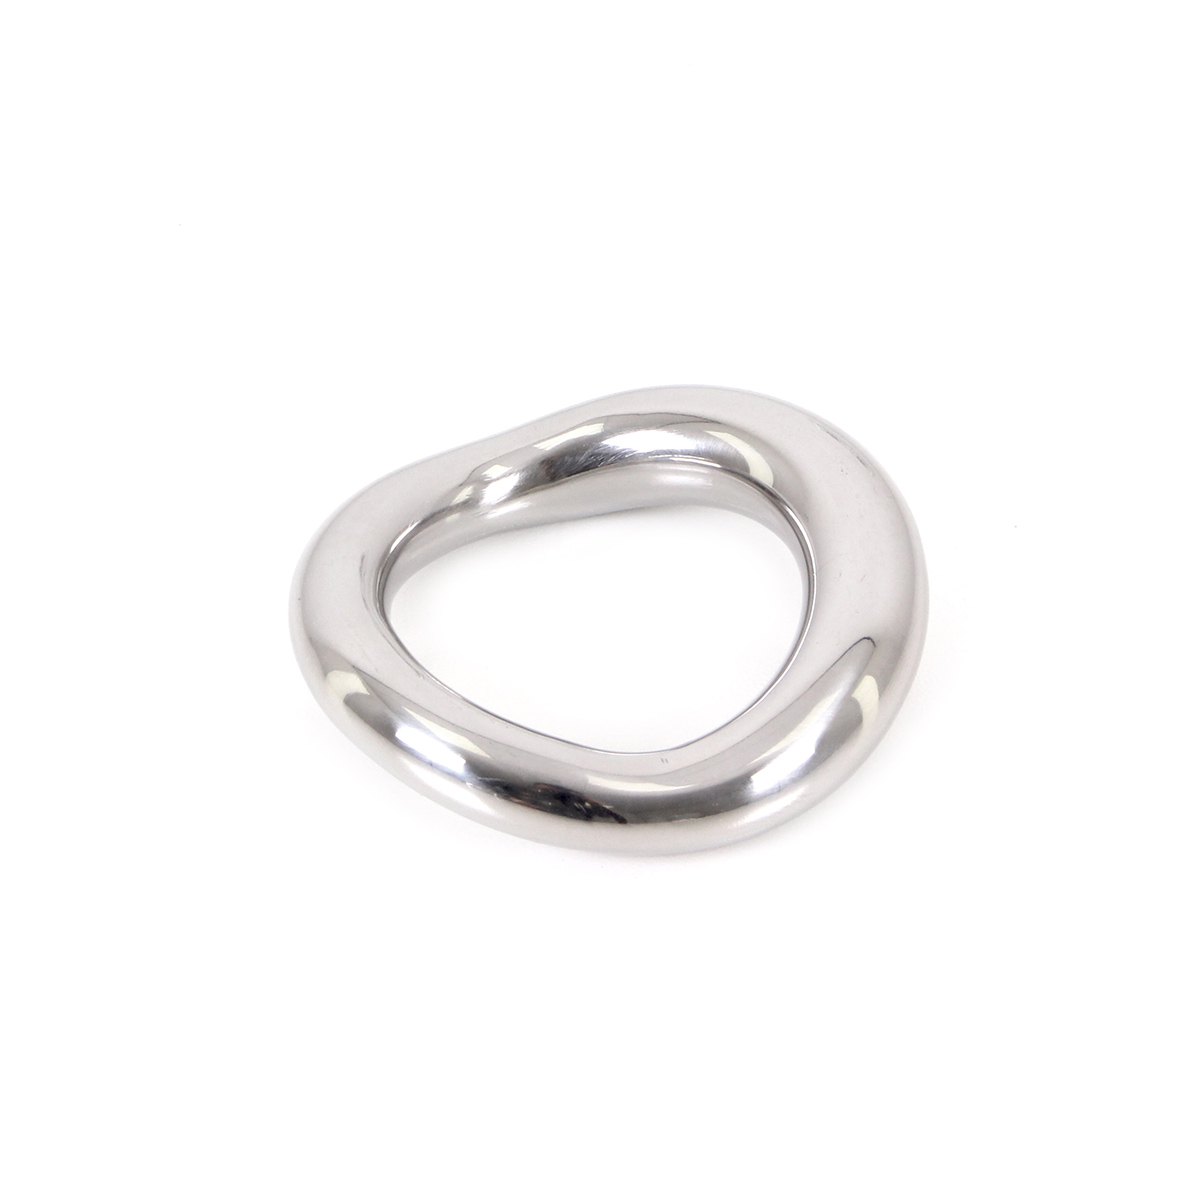 Costum-Fit-Cockring-45-mm-OPR-277045-1